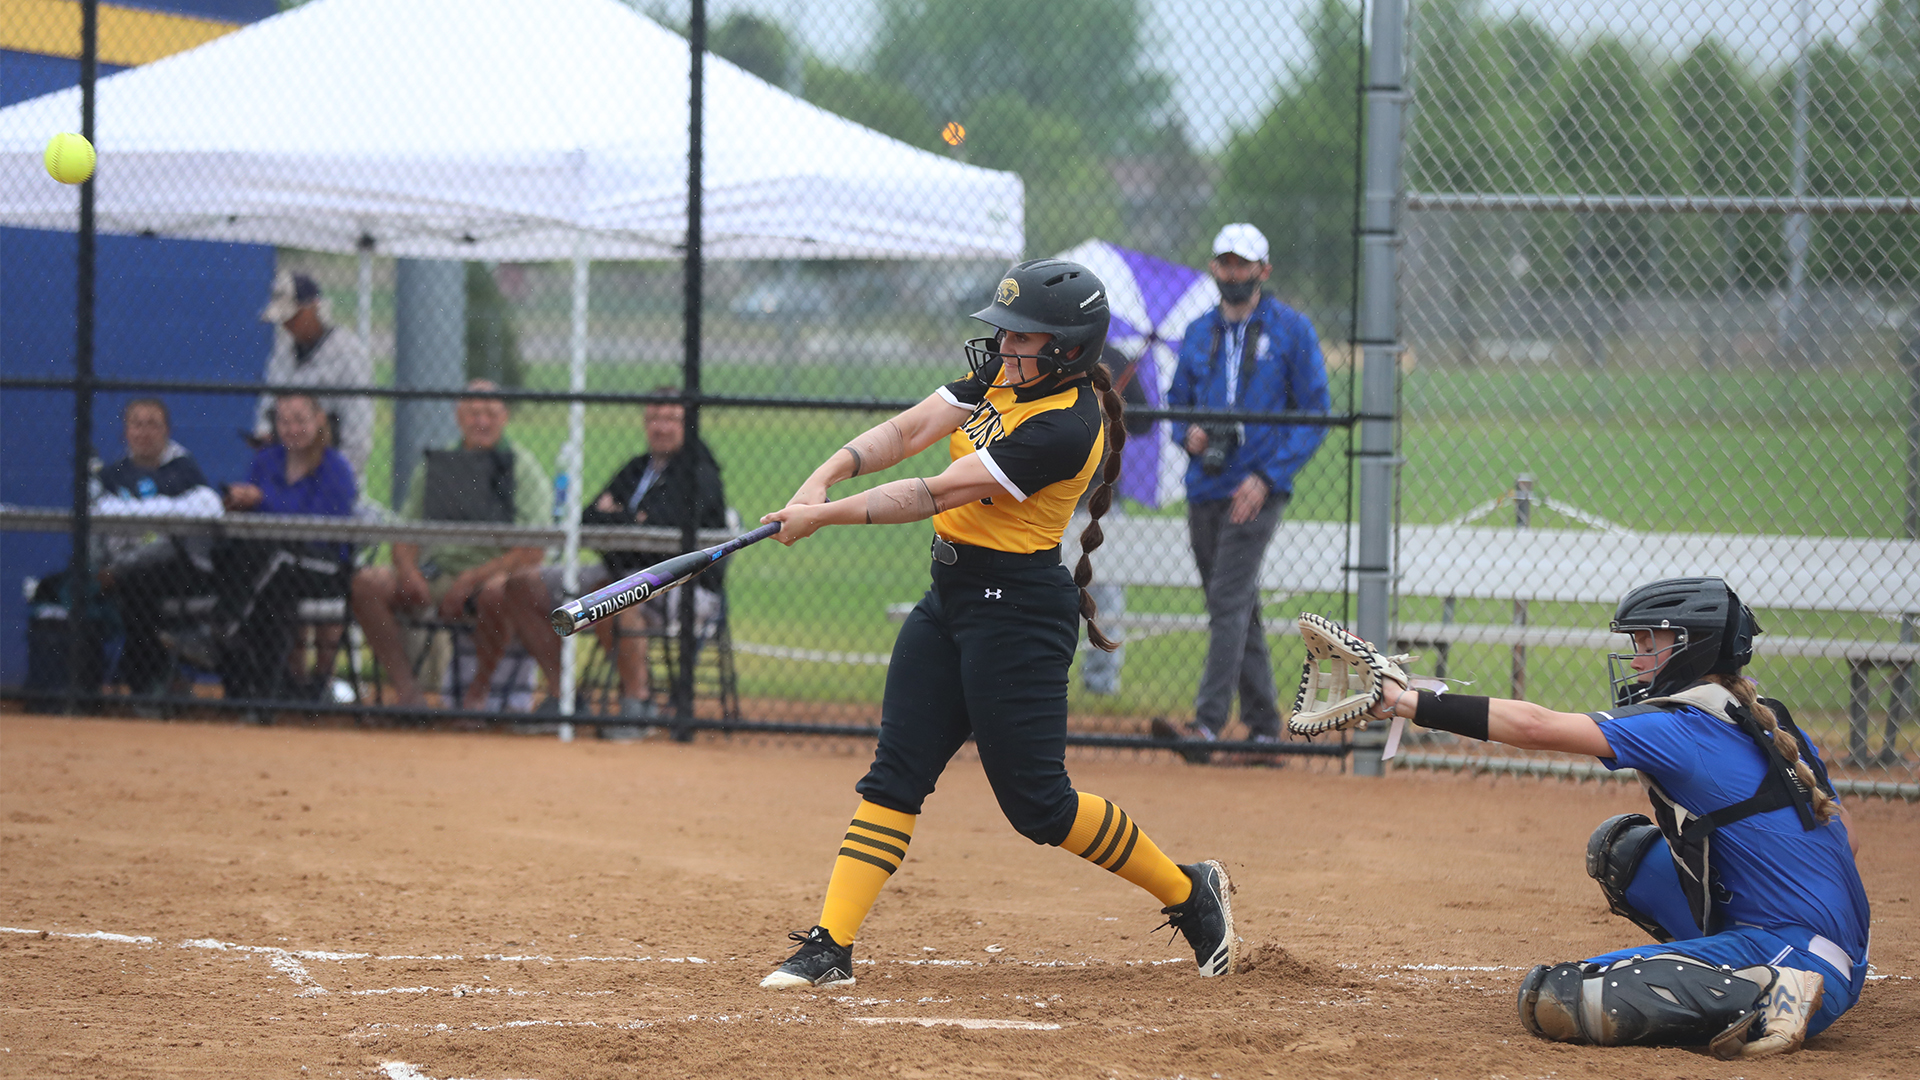 Acacia Tupa's third home run of the season gave the Titans the lead for good at 2-1 in the third inning.